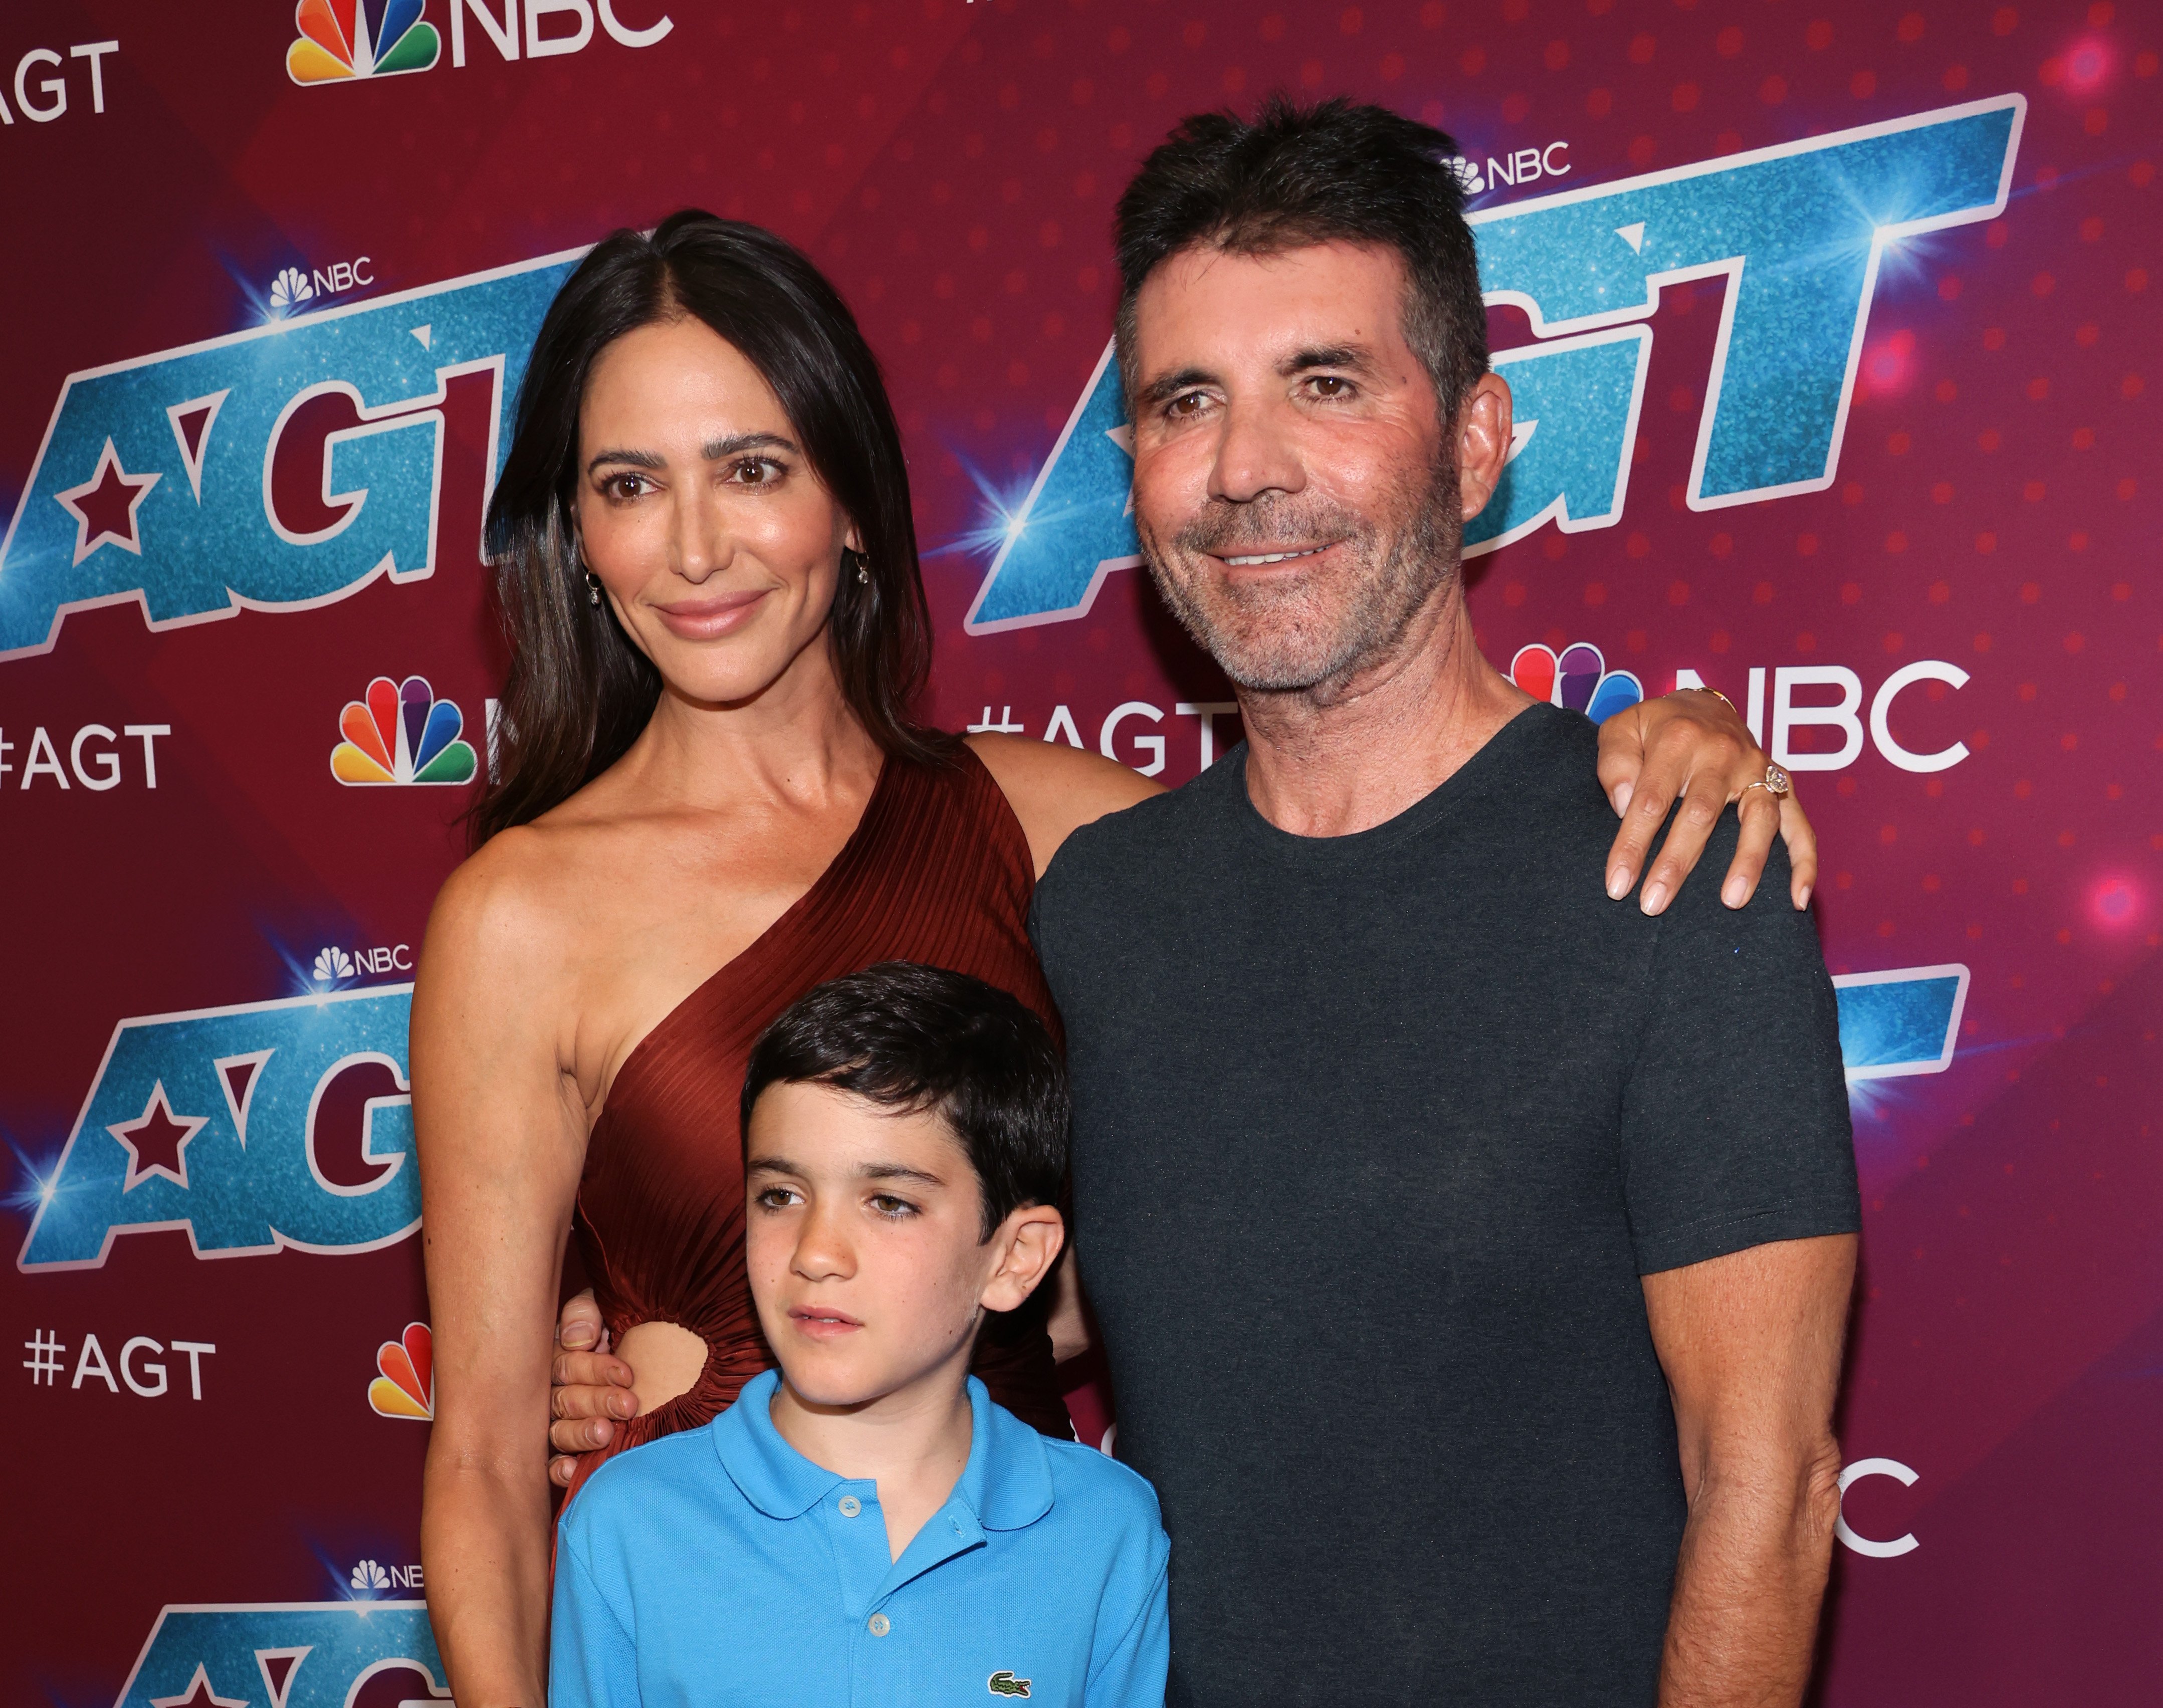 Lauren Silverman, Eric Cowell, and Simon Cowell on the red carpet for "America's Got Talent" season 17 live show on September 13, 2022, in Pasadena, California. | Source: Getty Images